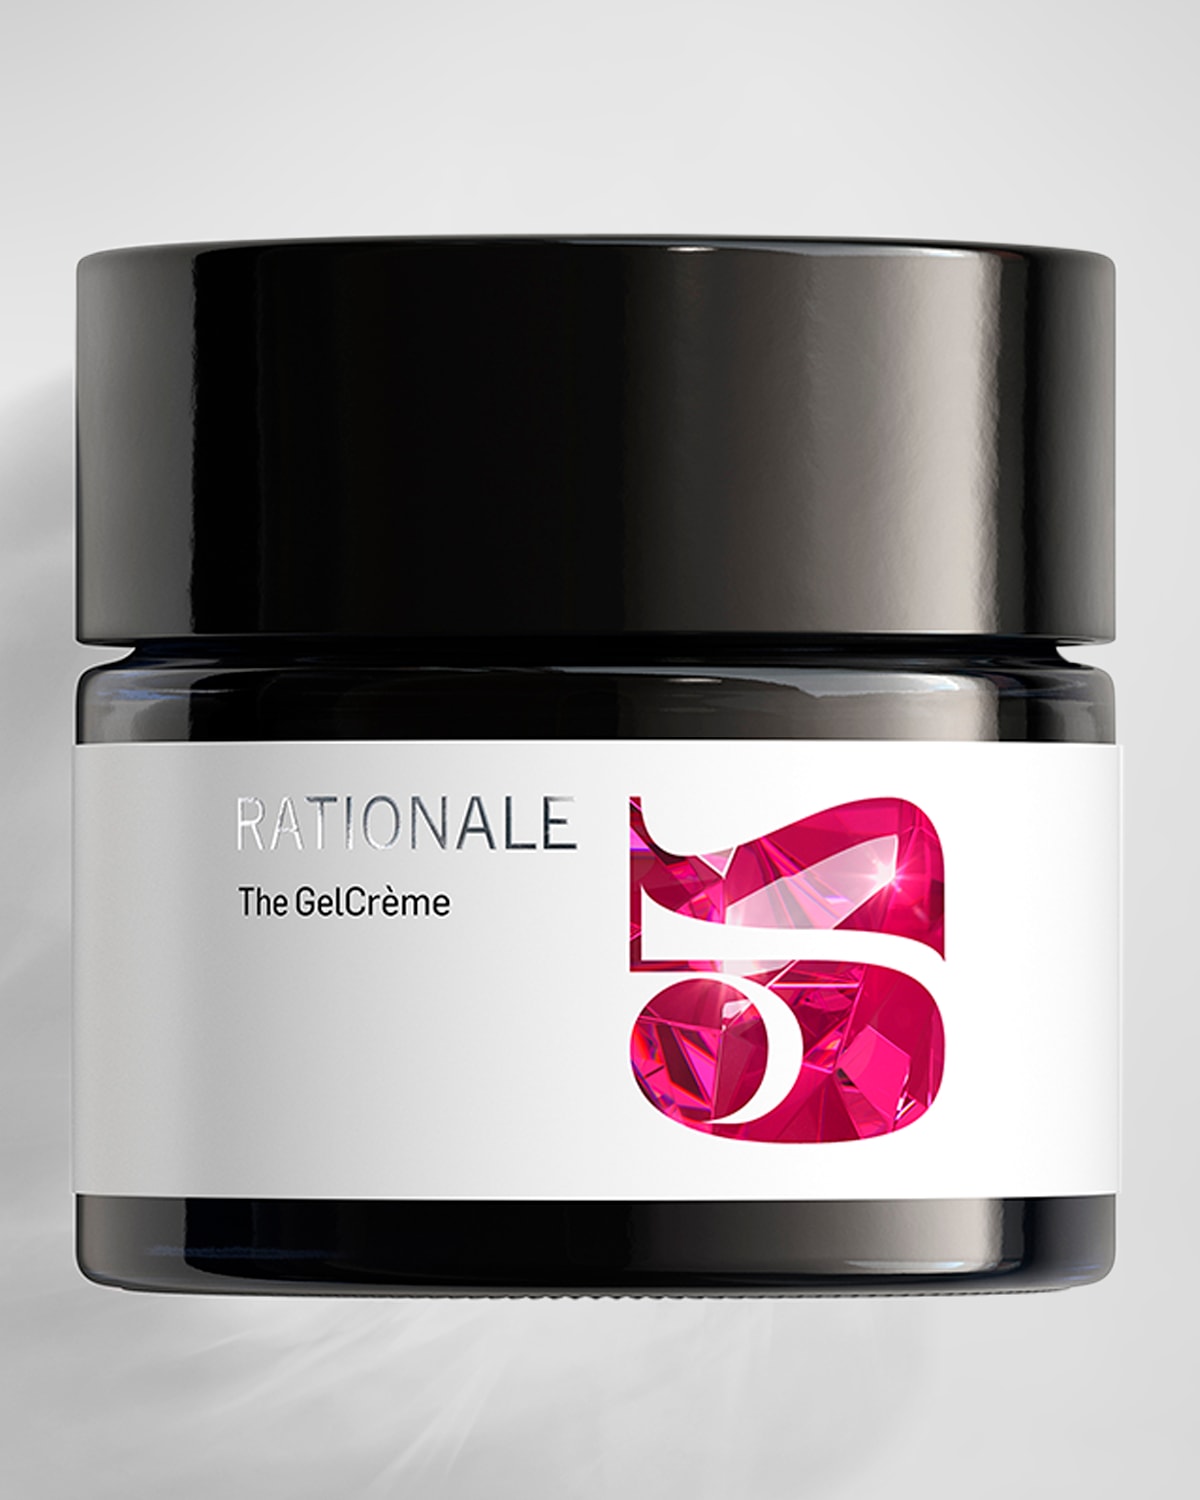 #5 The GelCreme, 1.7 oz.